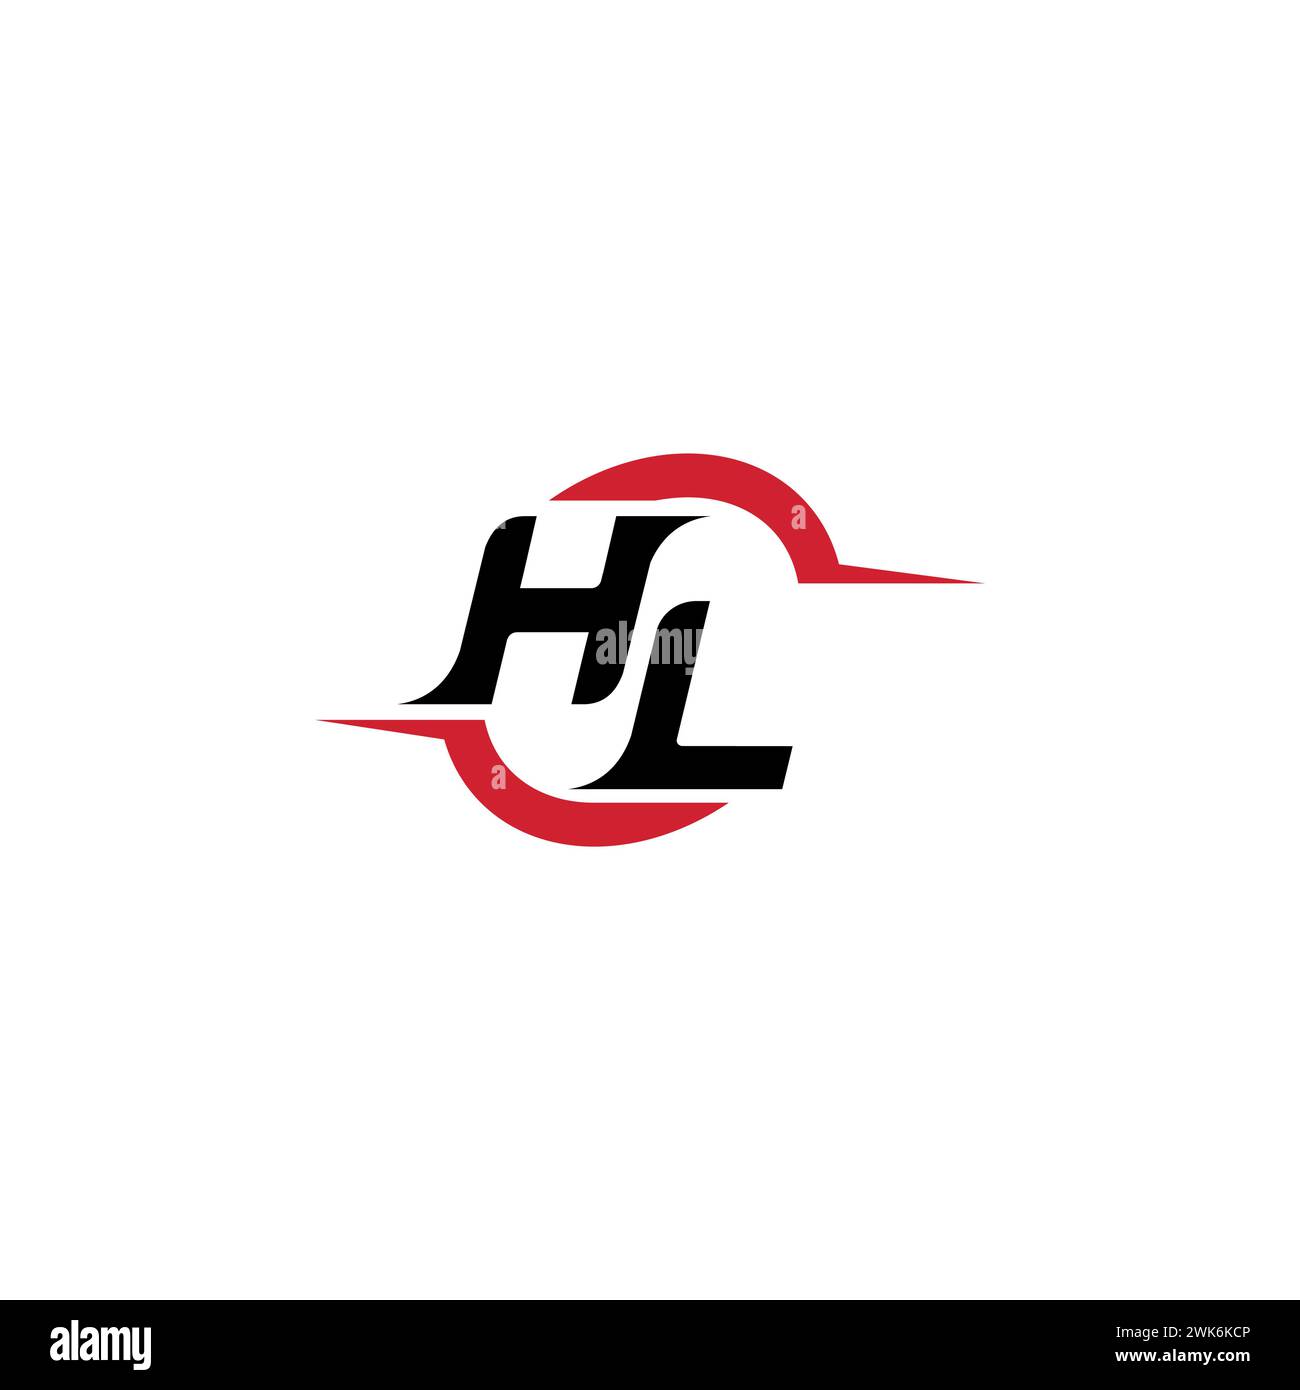 HL initial logo cool and stylish concept for esport or gaming logo as your inspirational Stock Vector